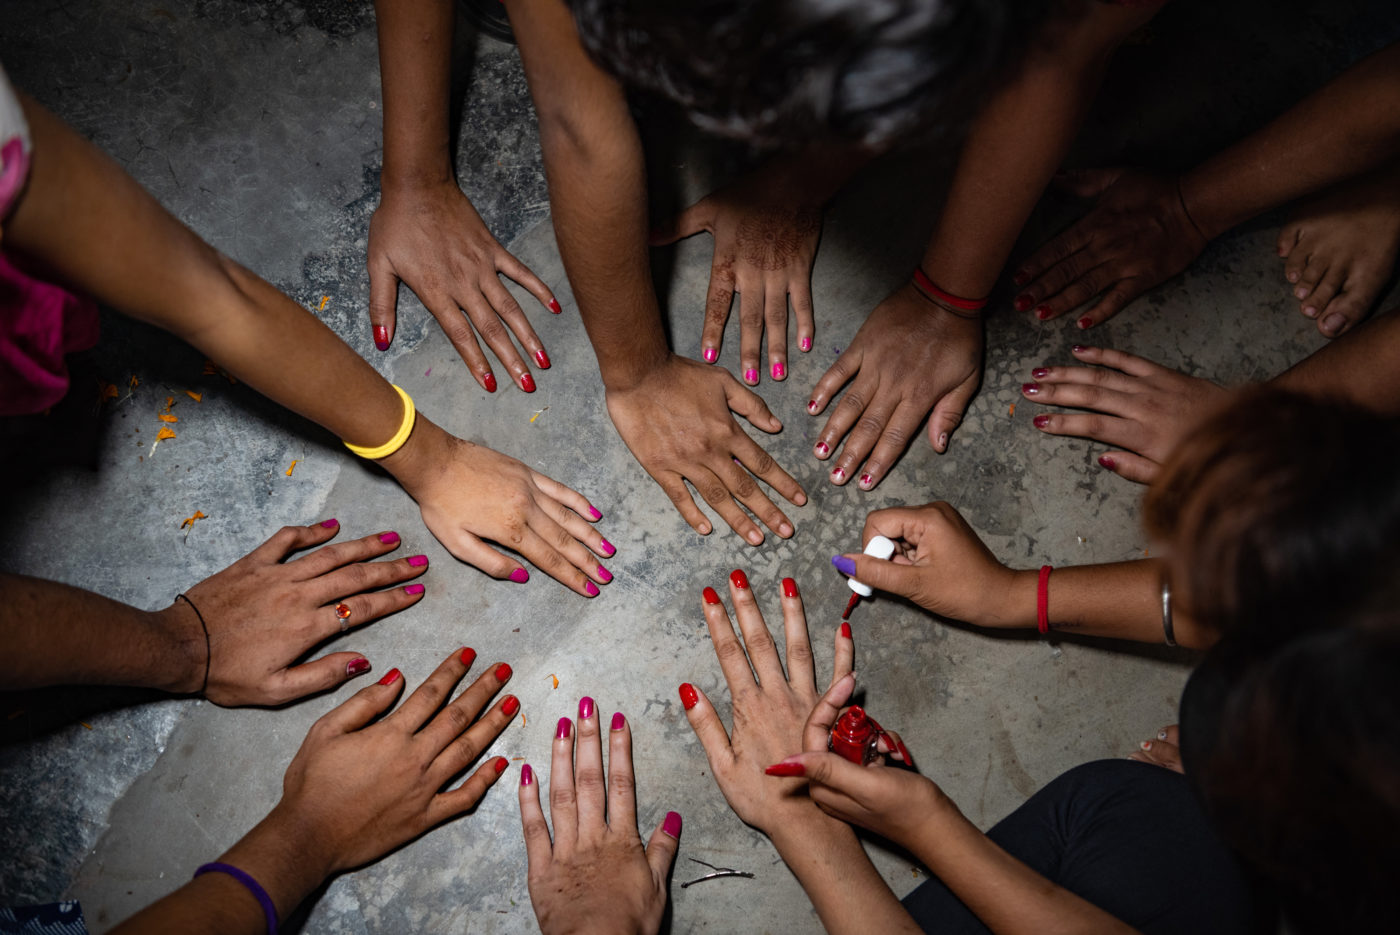 Girls paint their nails at a shelter in West Bengal, India